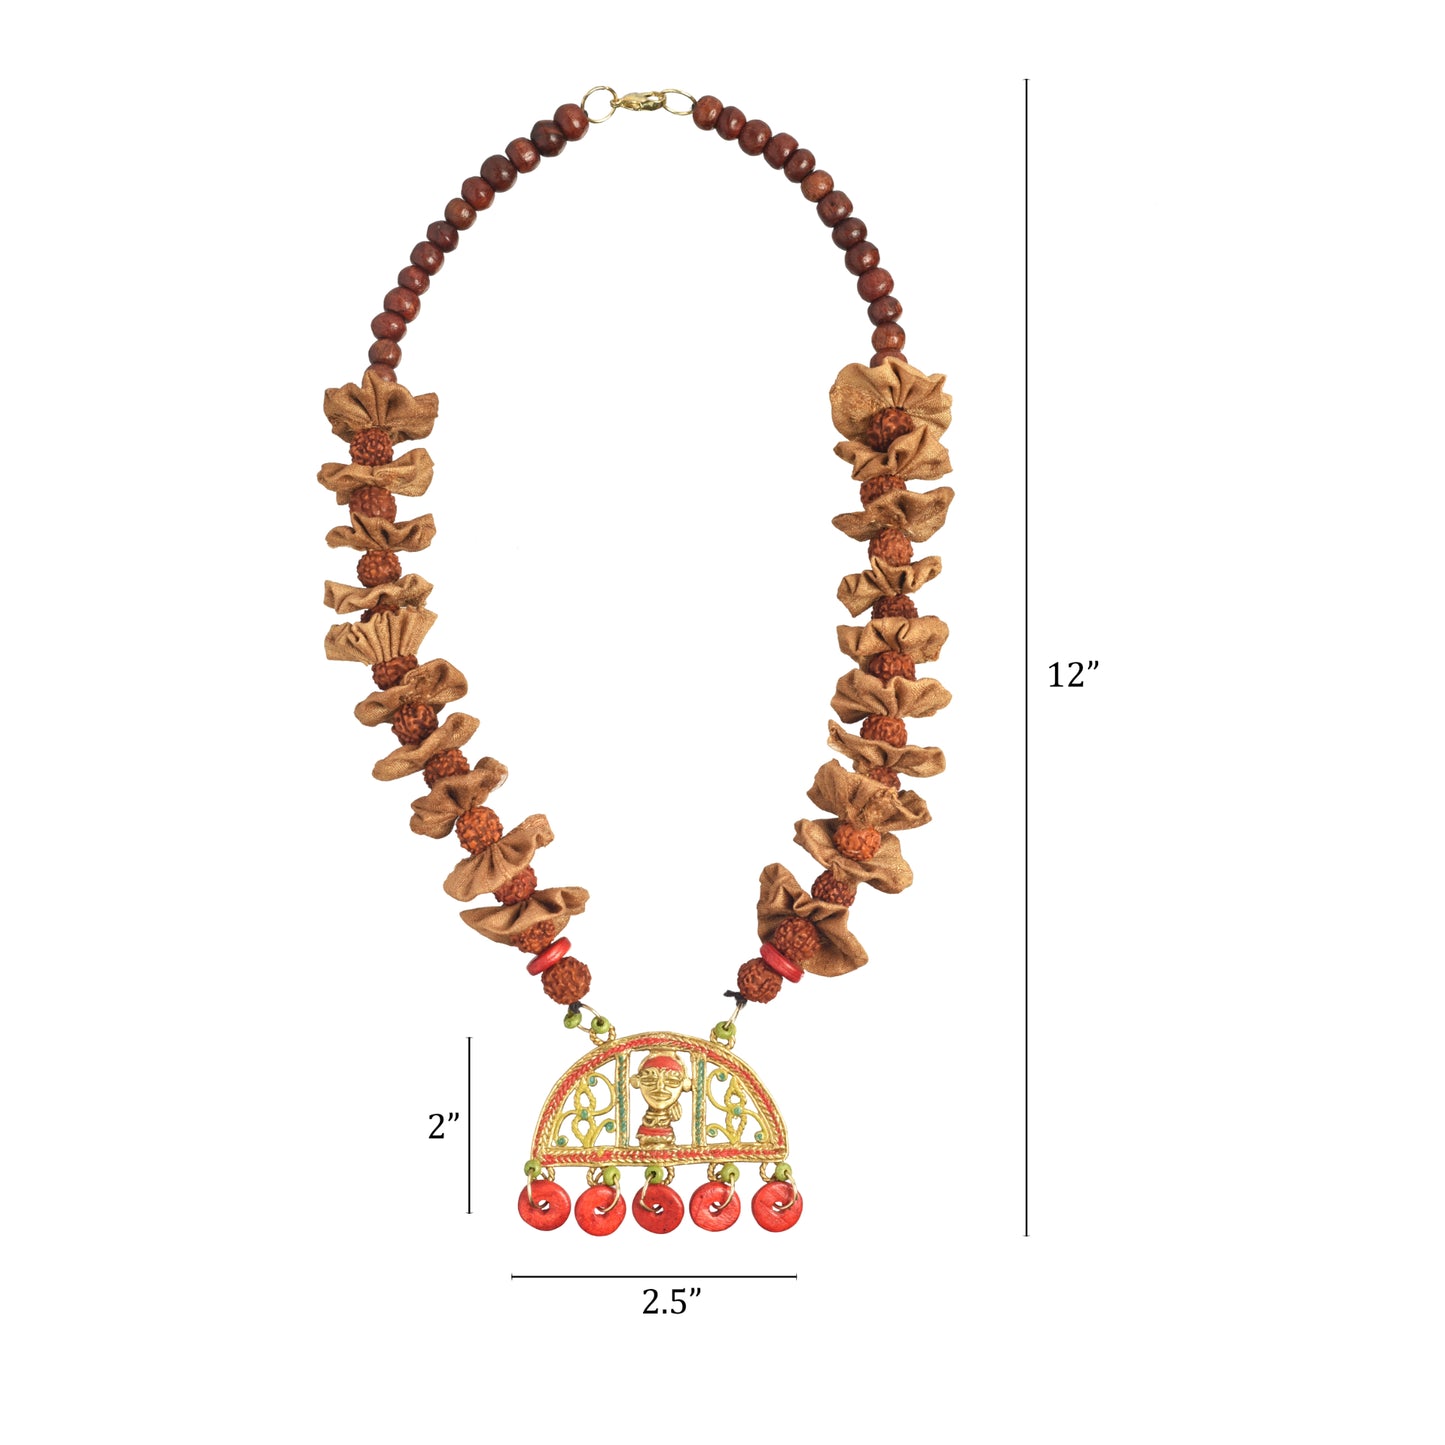 The Empress Moon Handcrafted Tribal Dokra Necklace